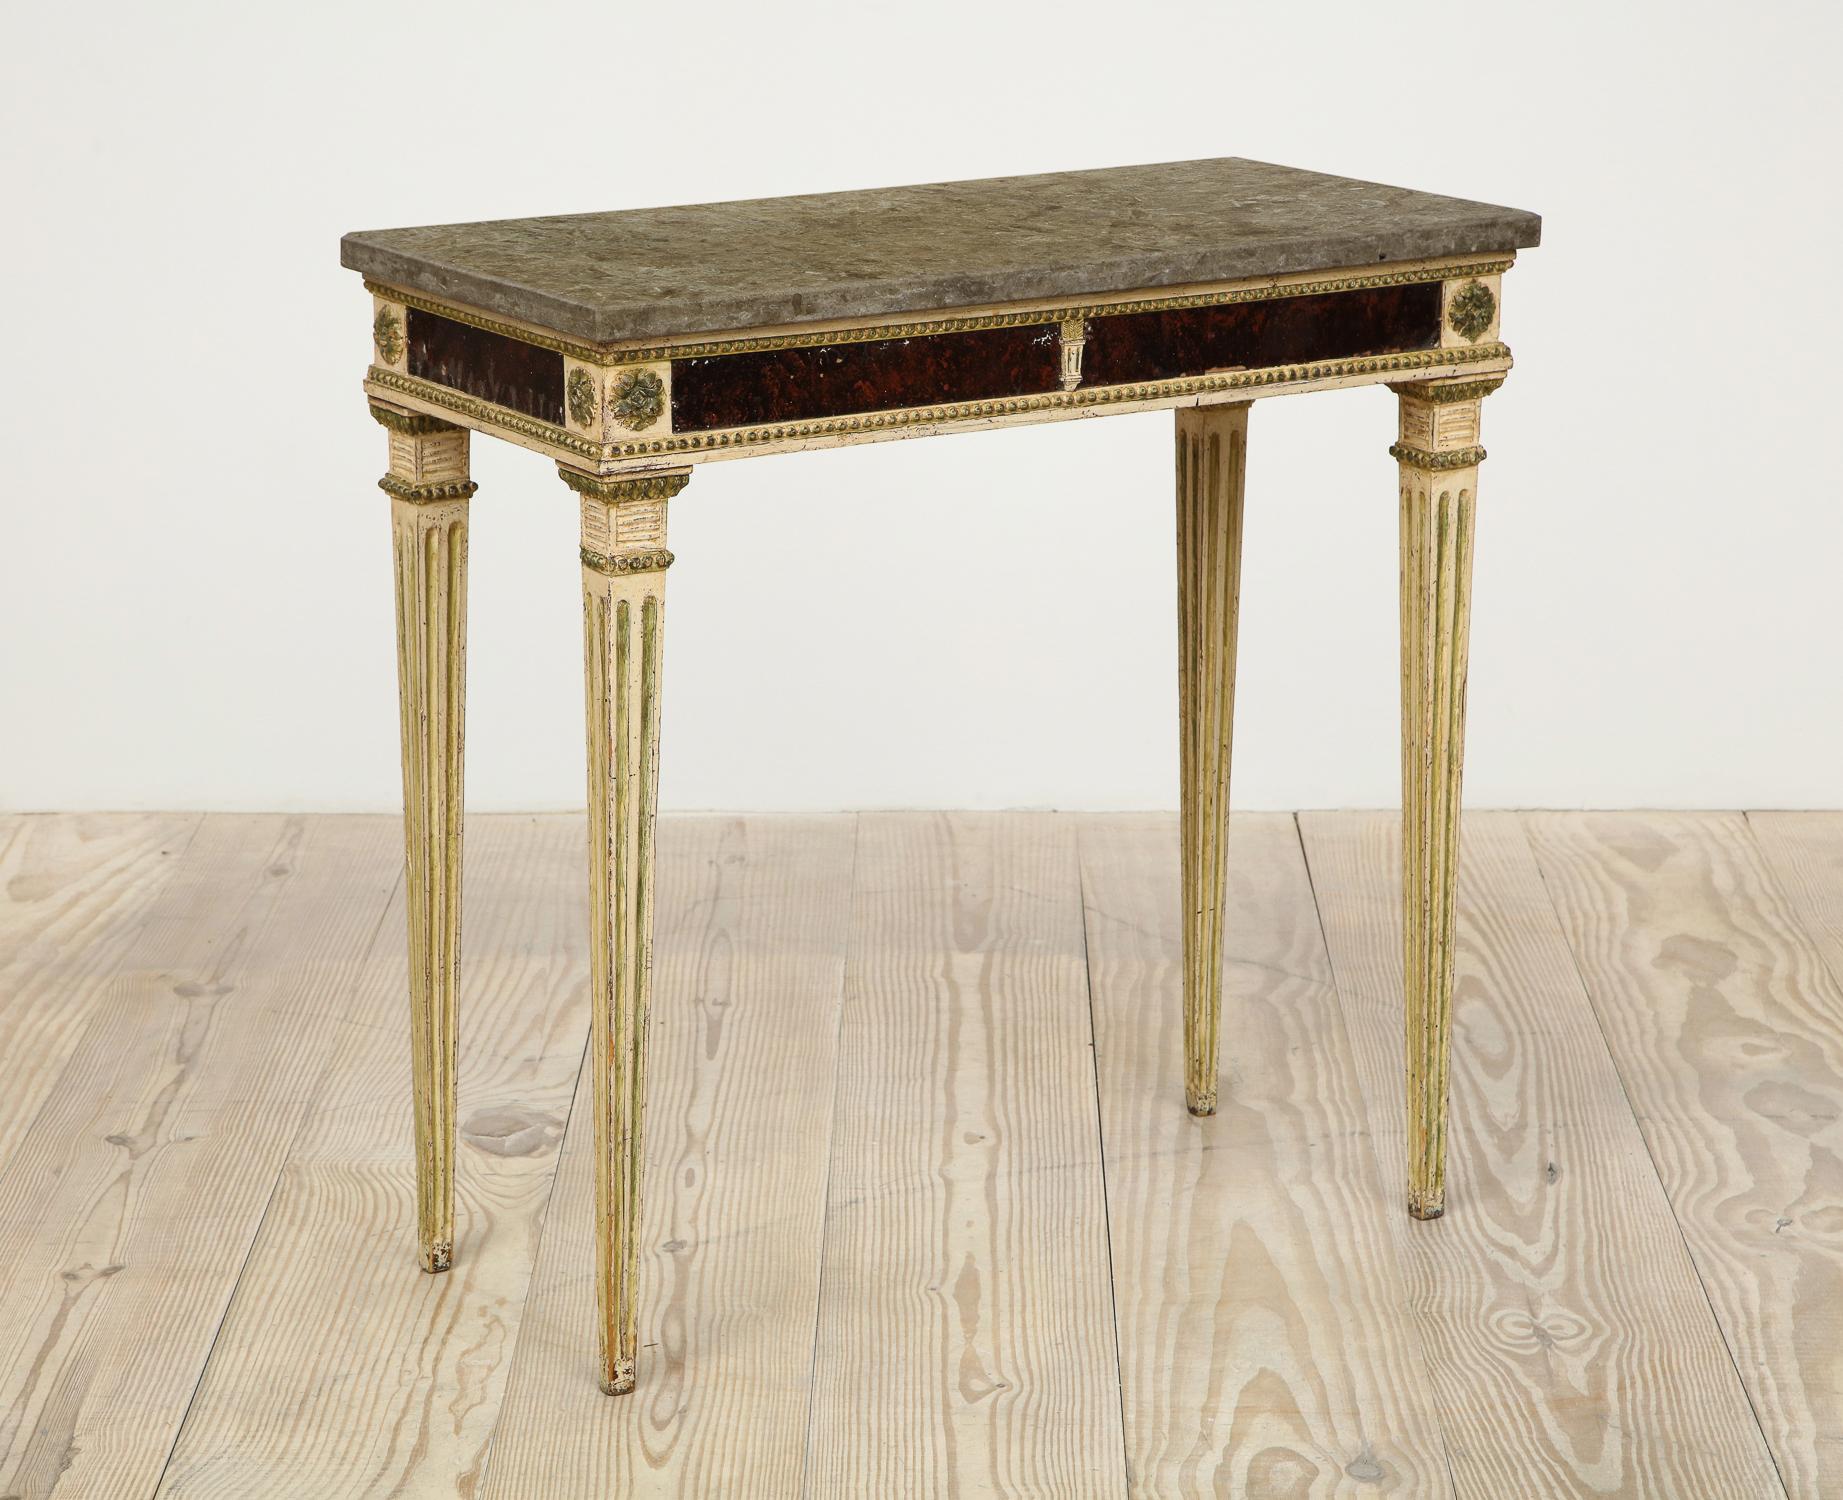 Gustavian neoclassical console with stone top, origin. Sweden, circa 1780, original paint, inset panels with reverse painting on glass imitating porphory and komstad stone top.

A beautifully proportioned, elegant 18th century neoclassical console